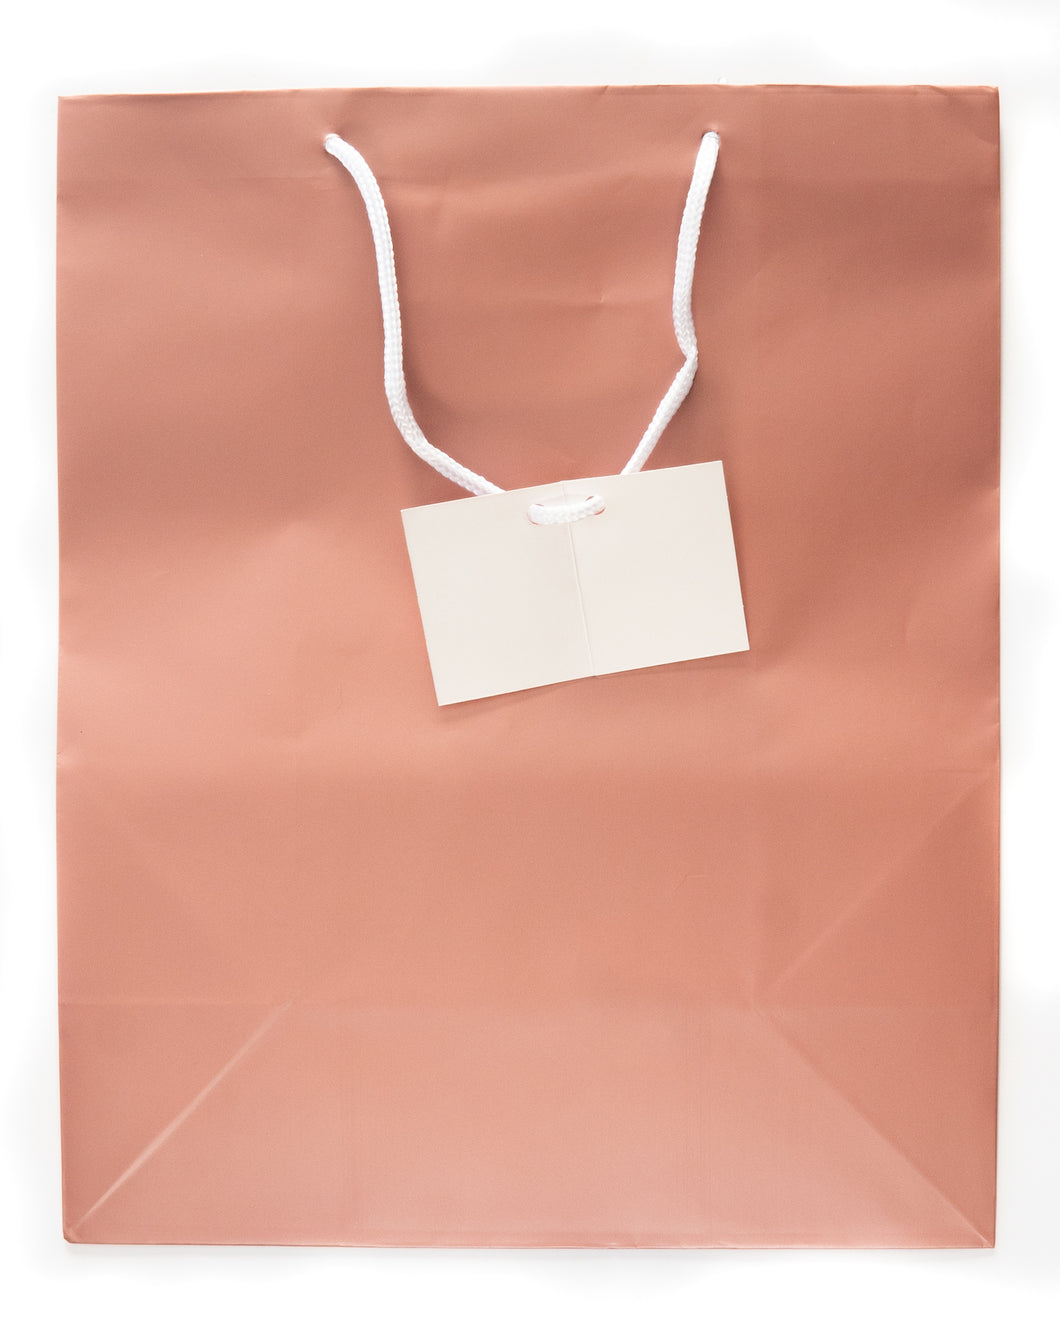 Gift Bag Rose Gold with Cord Handle and Tag